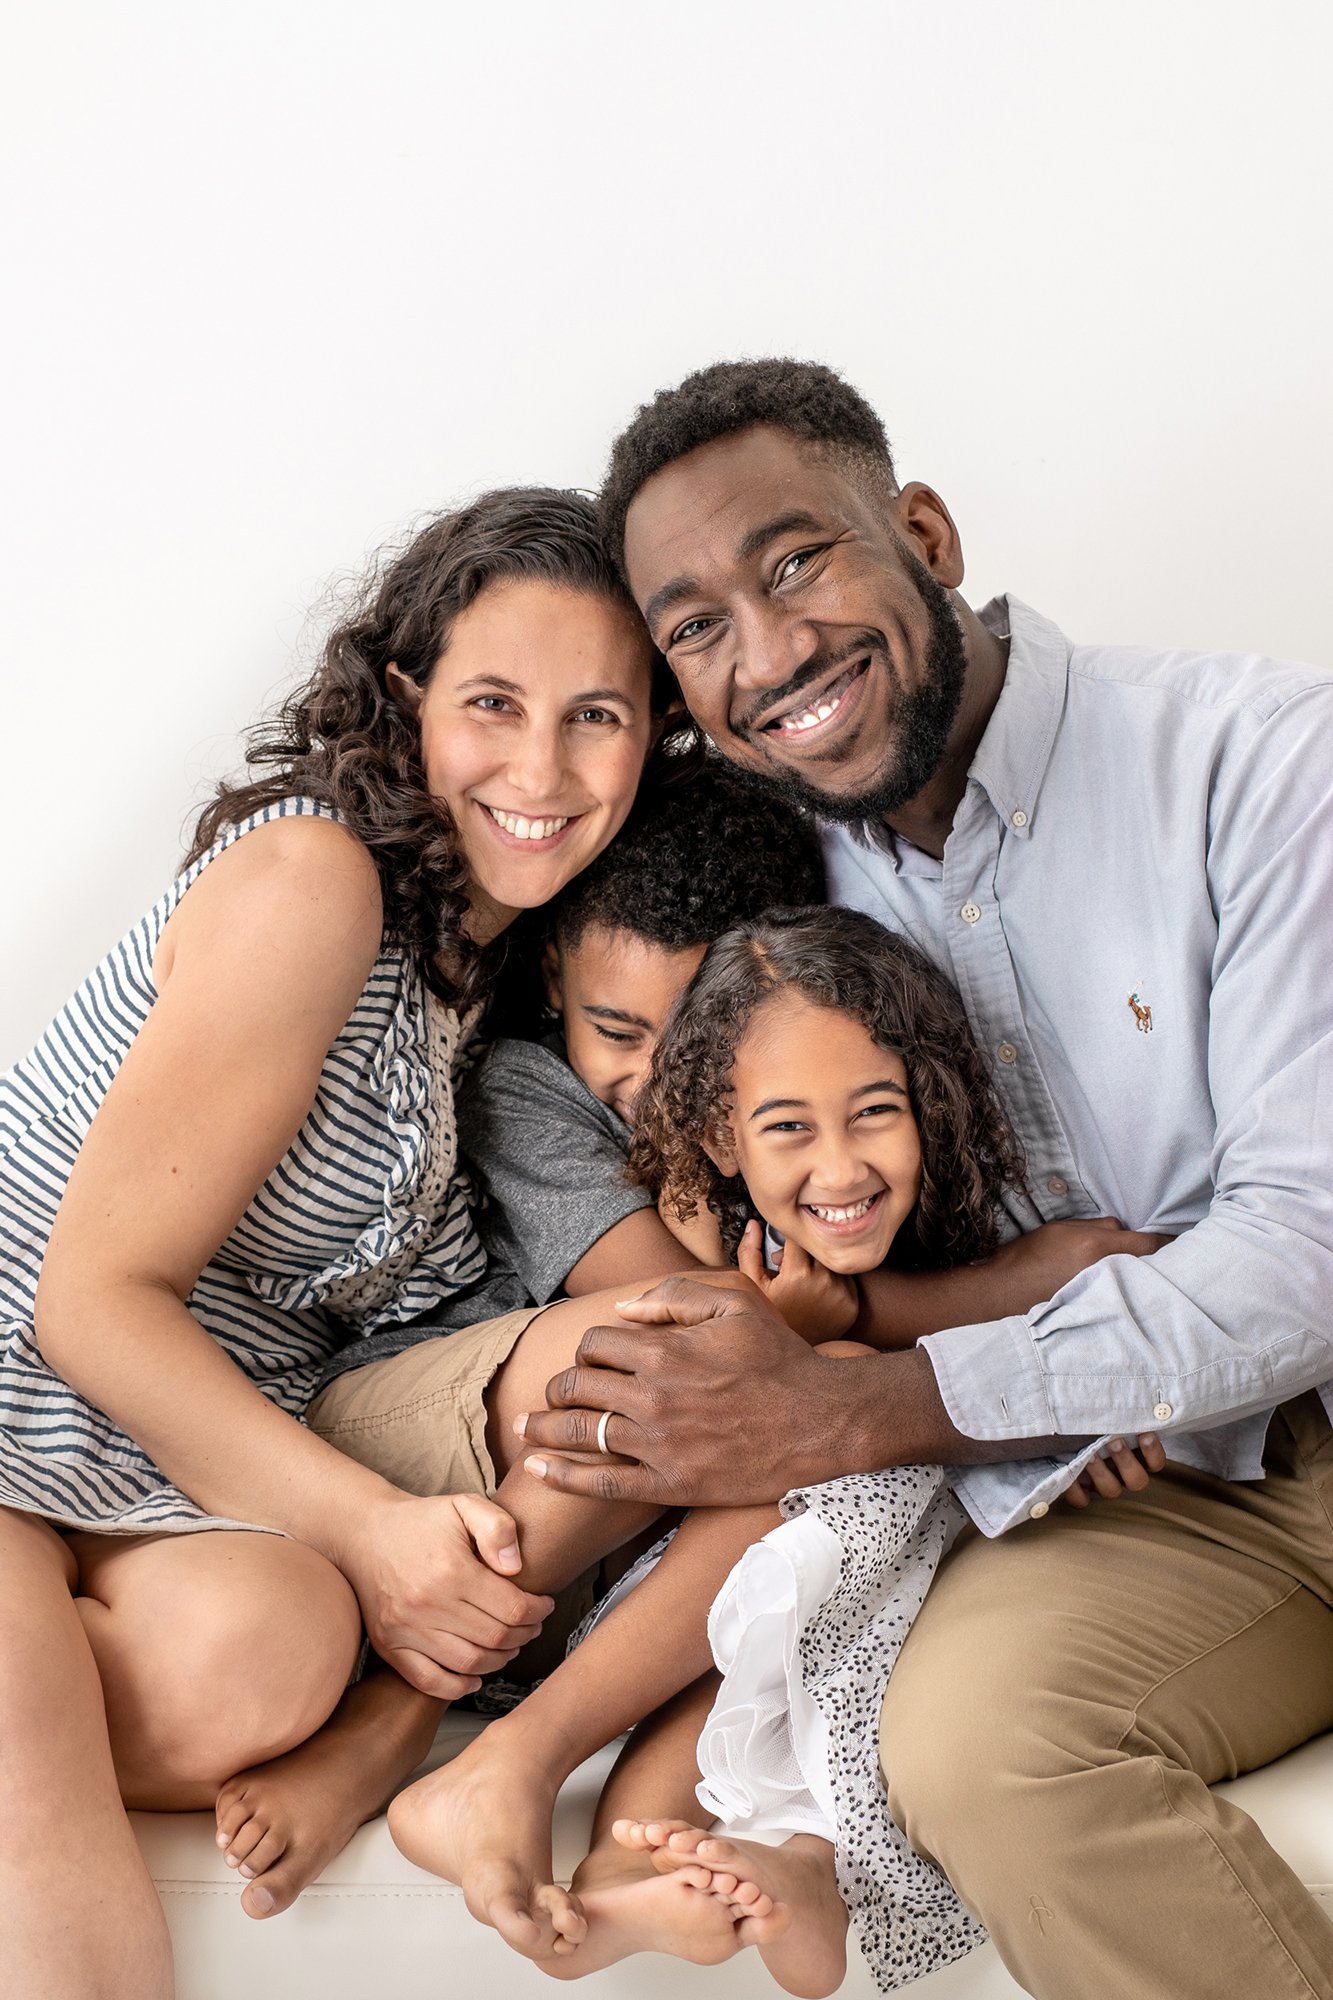   In-studio family portrait, family laughing and smiling at camera during family photos. Family photo pose suggestions posing family for family portrait #UnionCountyFamilyPhotographer #PassaicCountyFamilyPhotographer #NorthernNewJerseyFamilyPhotograp